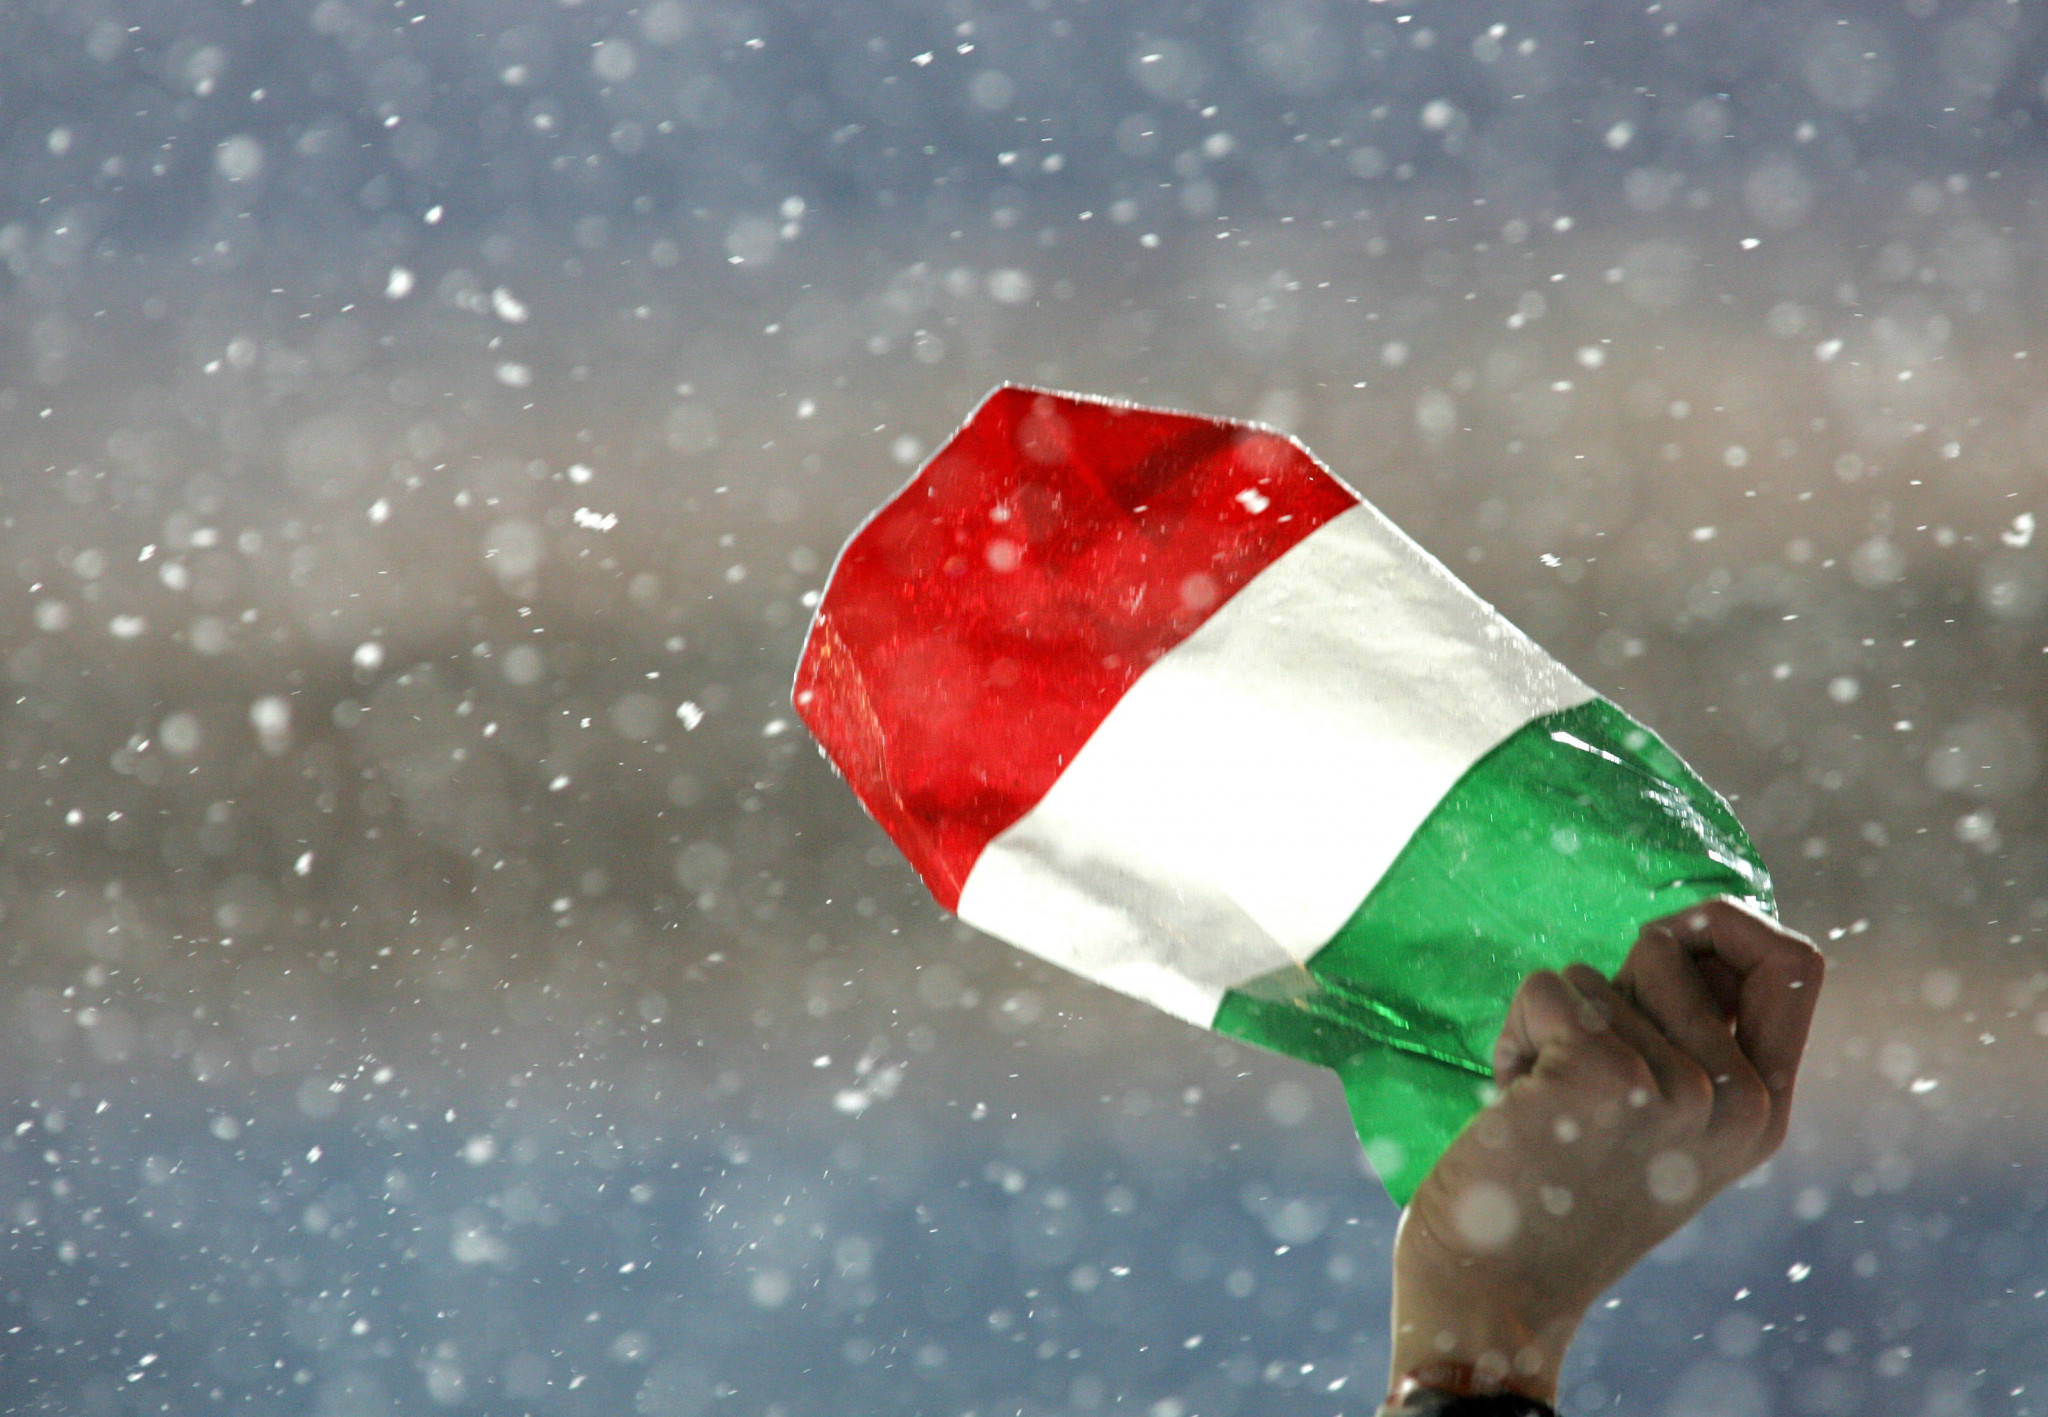 Lombardy-Trentino enters continuous dialogue phase to host Winter Youth Olympics